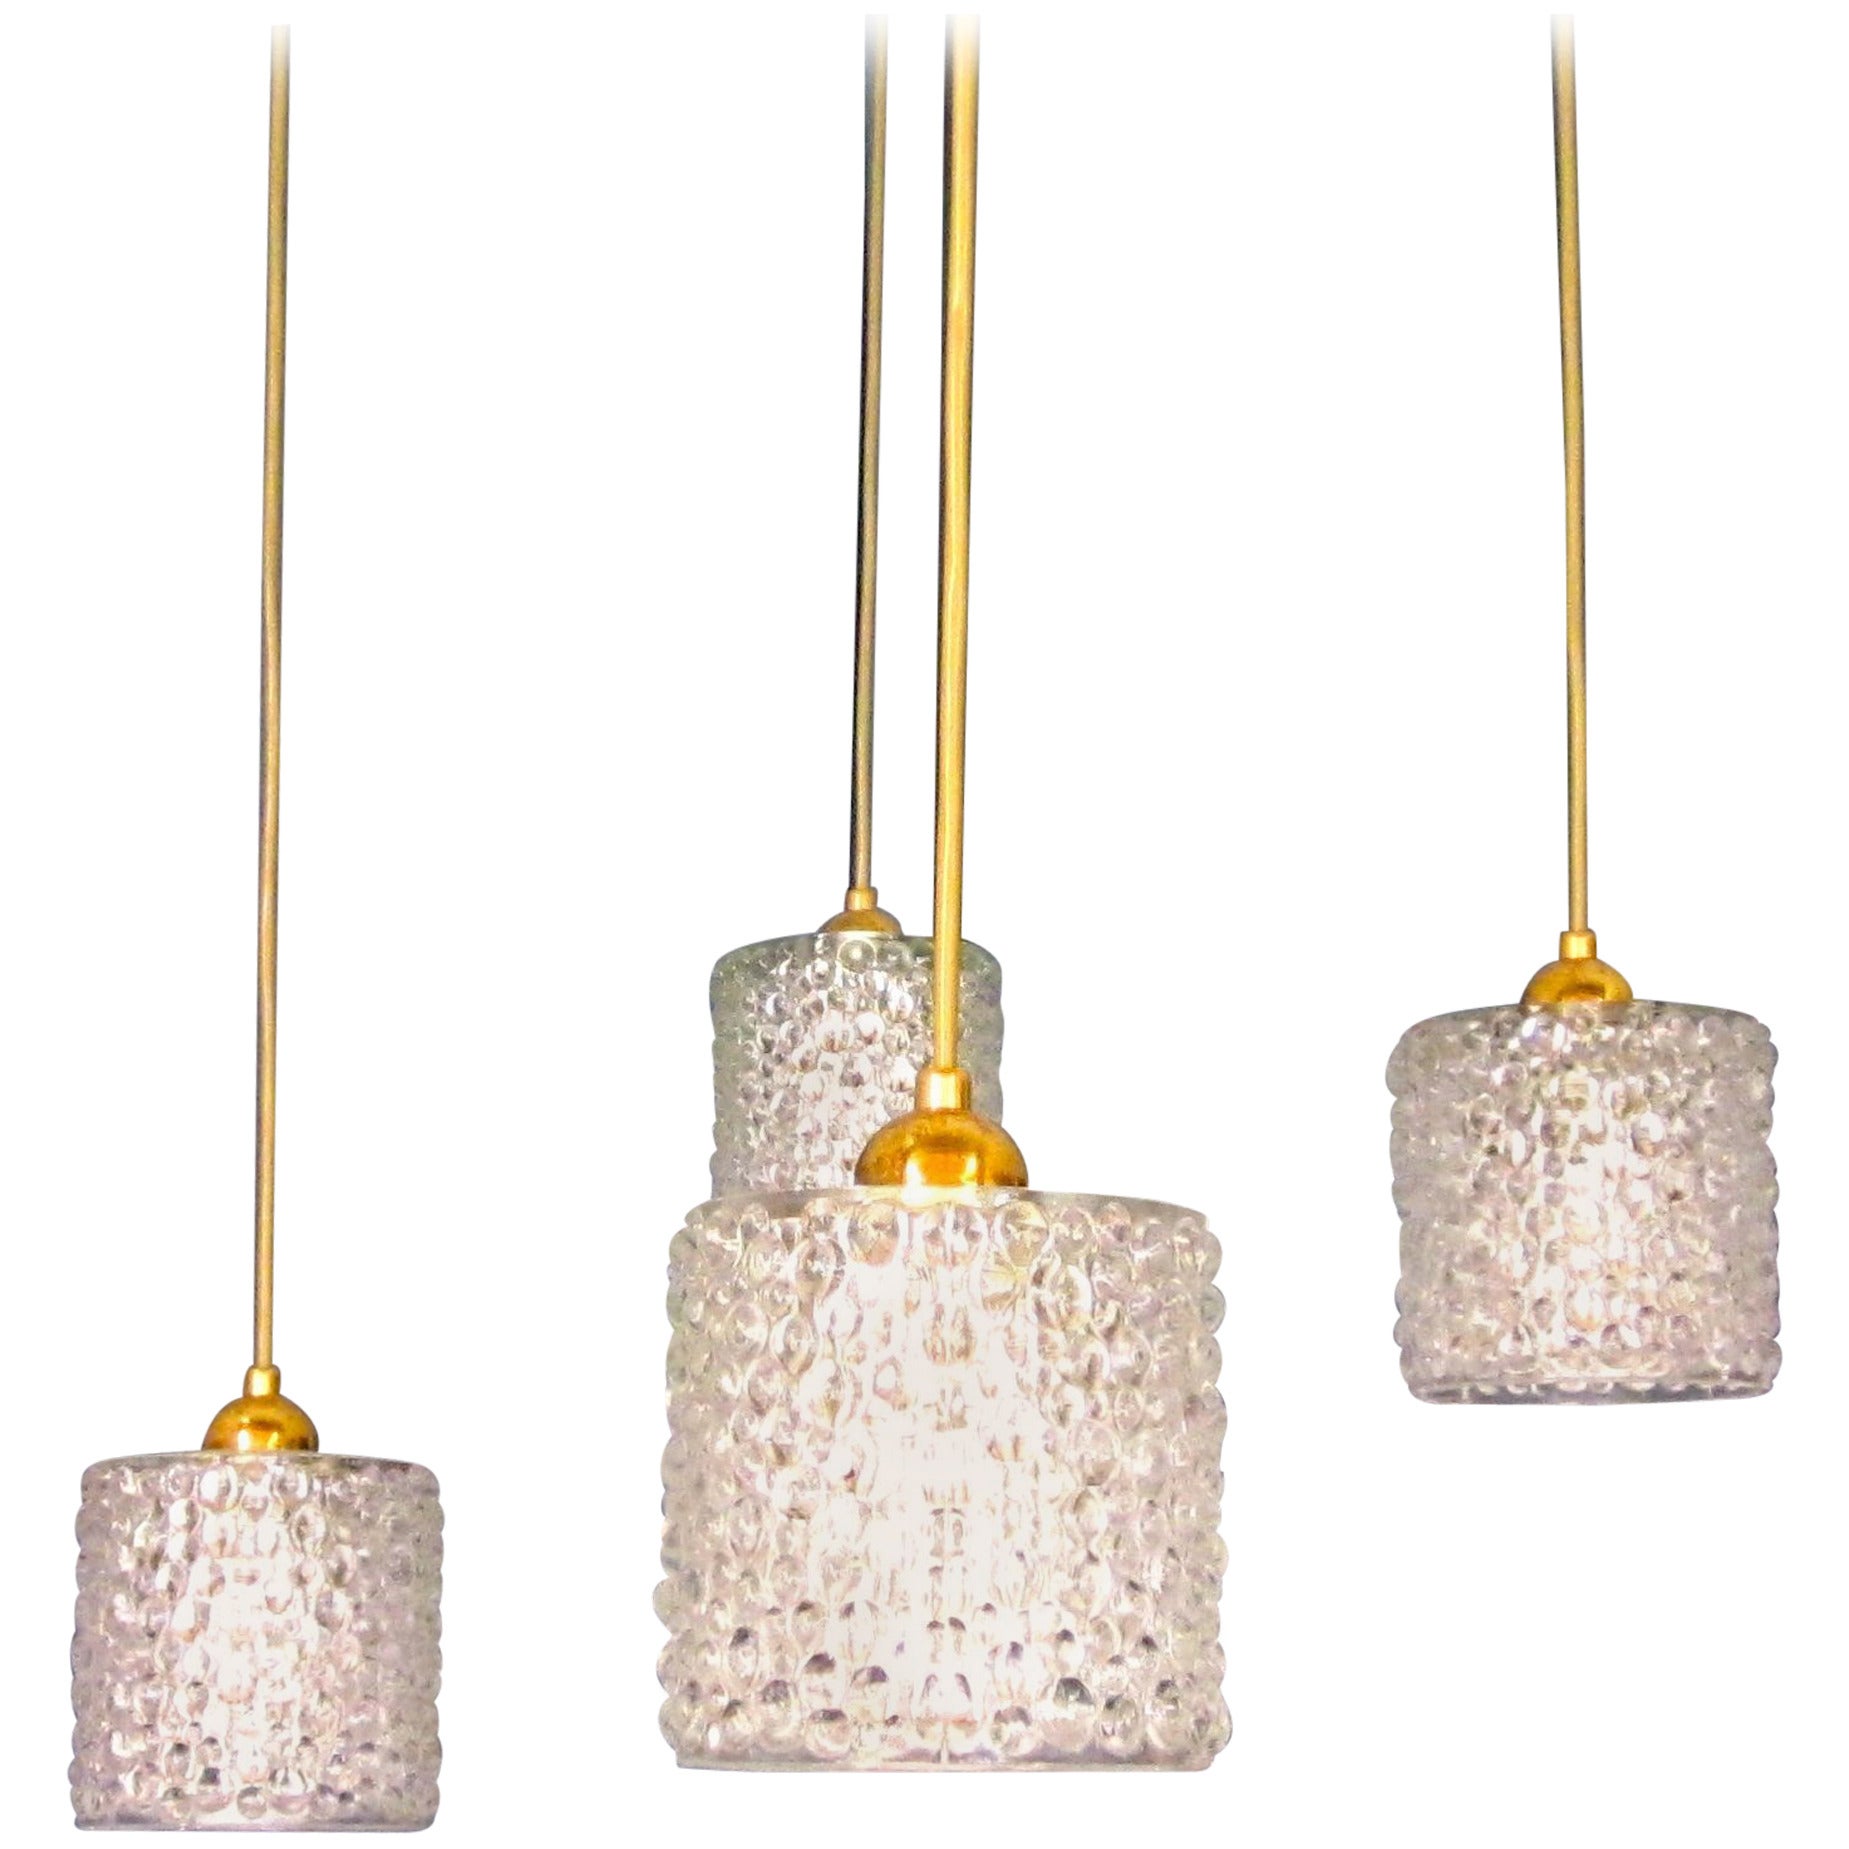 1960s Crystal Textured Pendant Lamps, Set of Four, Italy For Sale